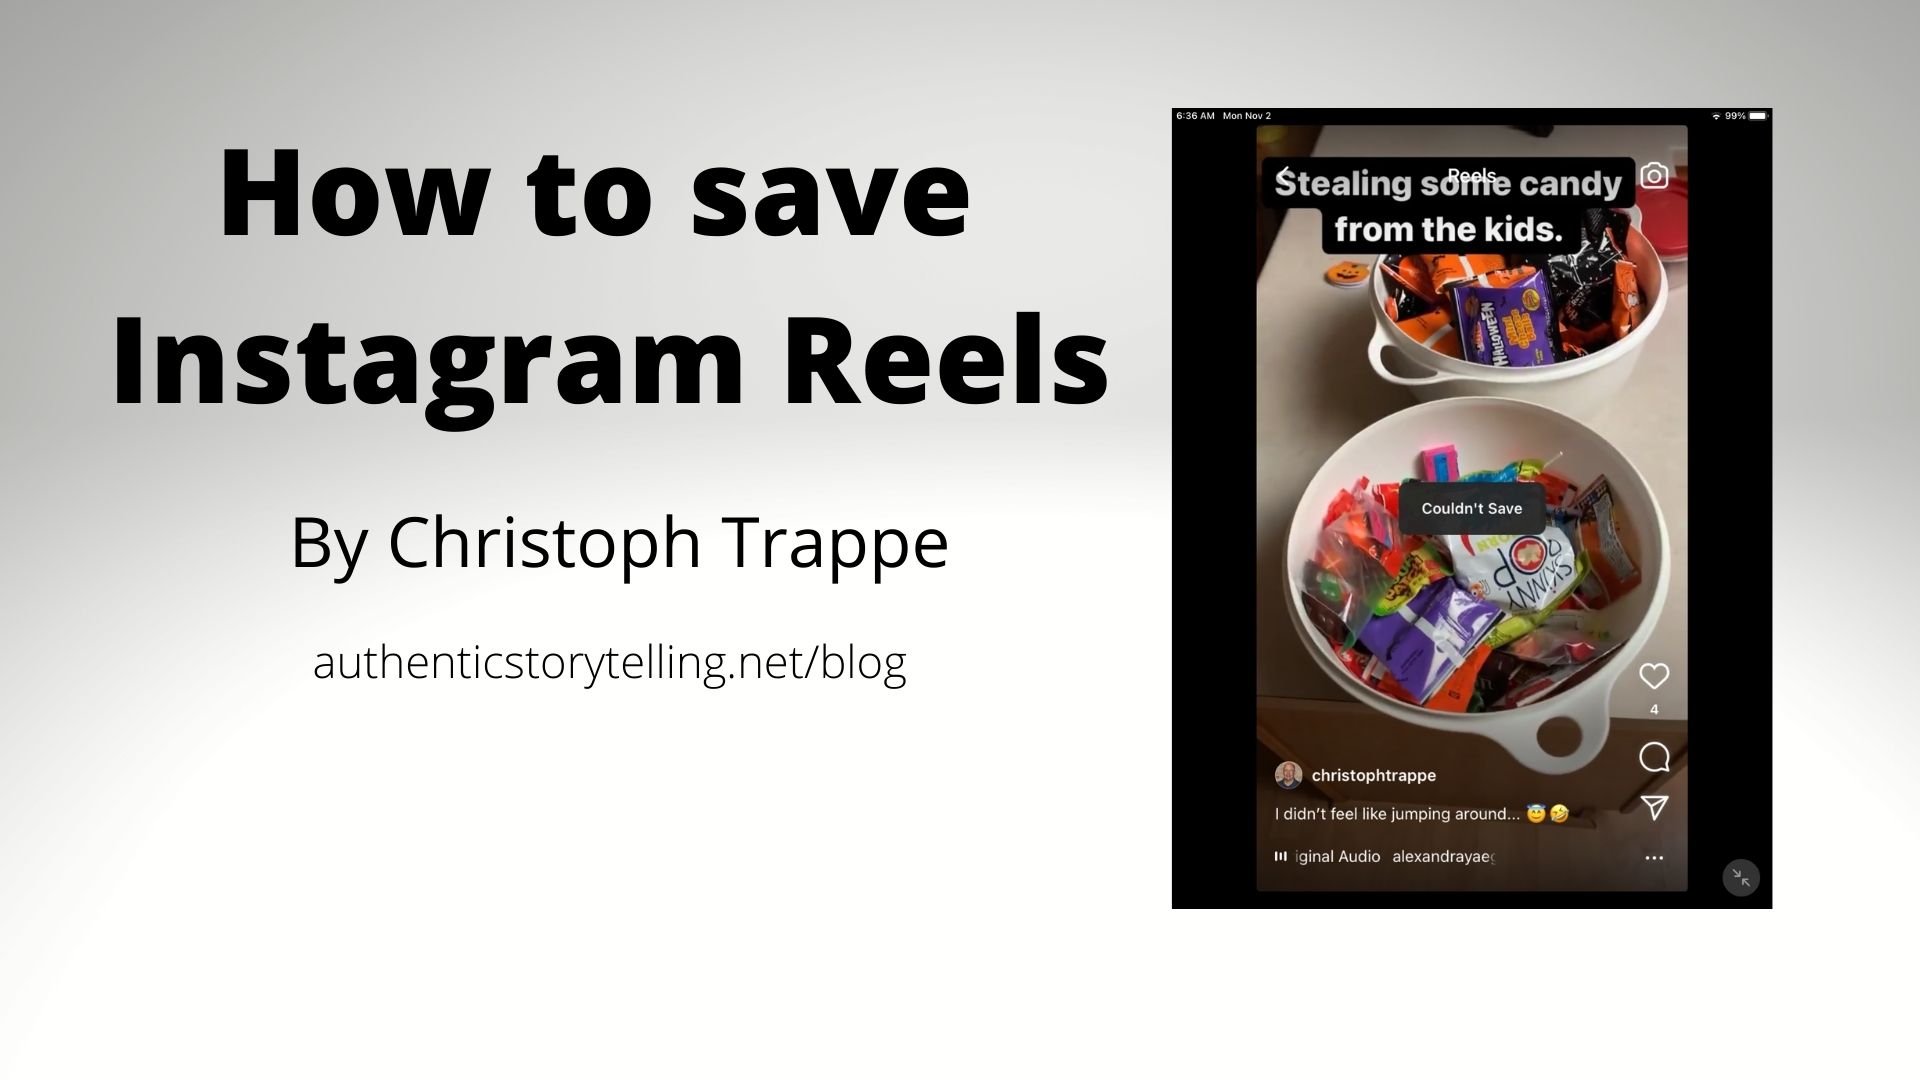 https://www.christophtrappe.com/wp-content/uploads/2020/11/How-to-save-Instagram-Reels.jpg